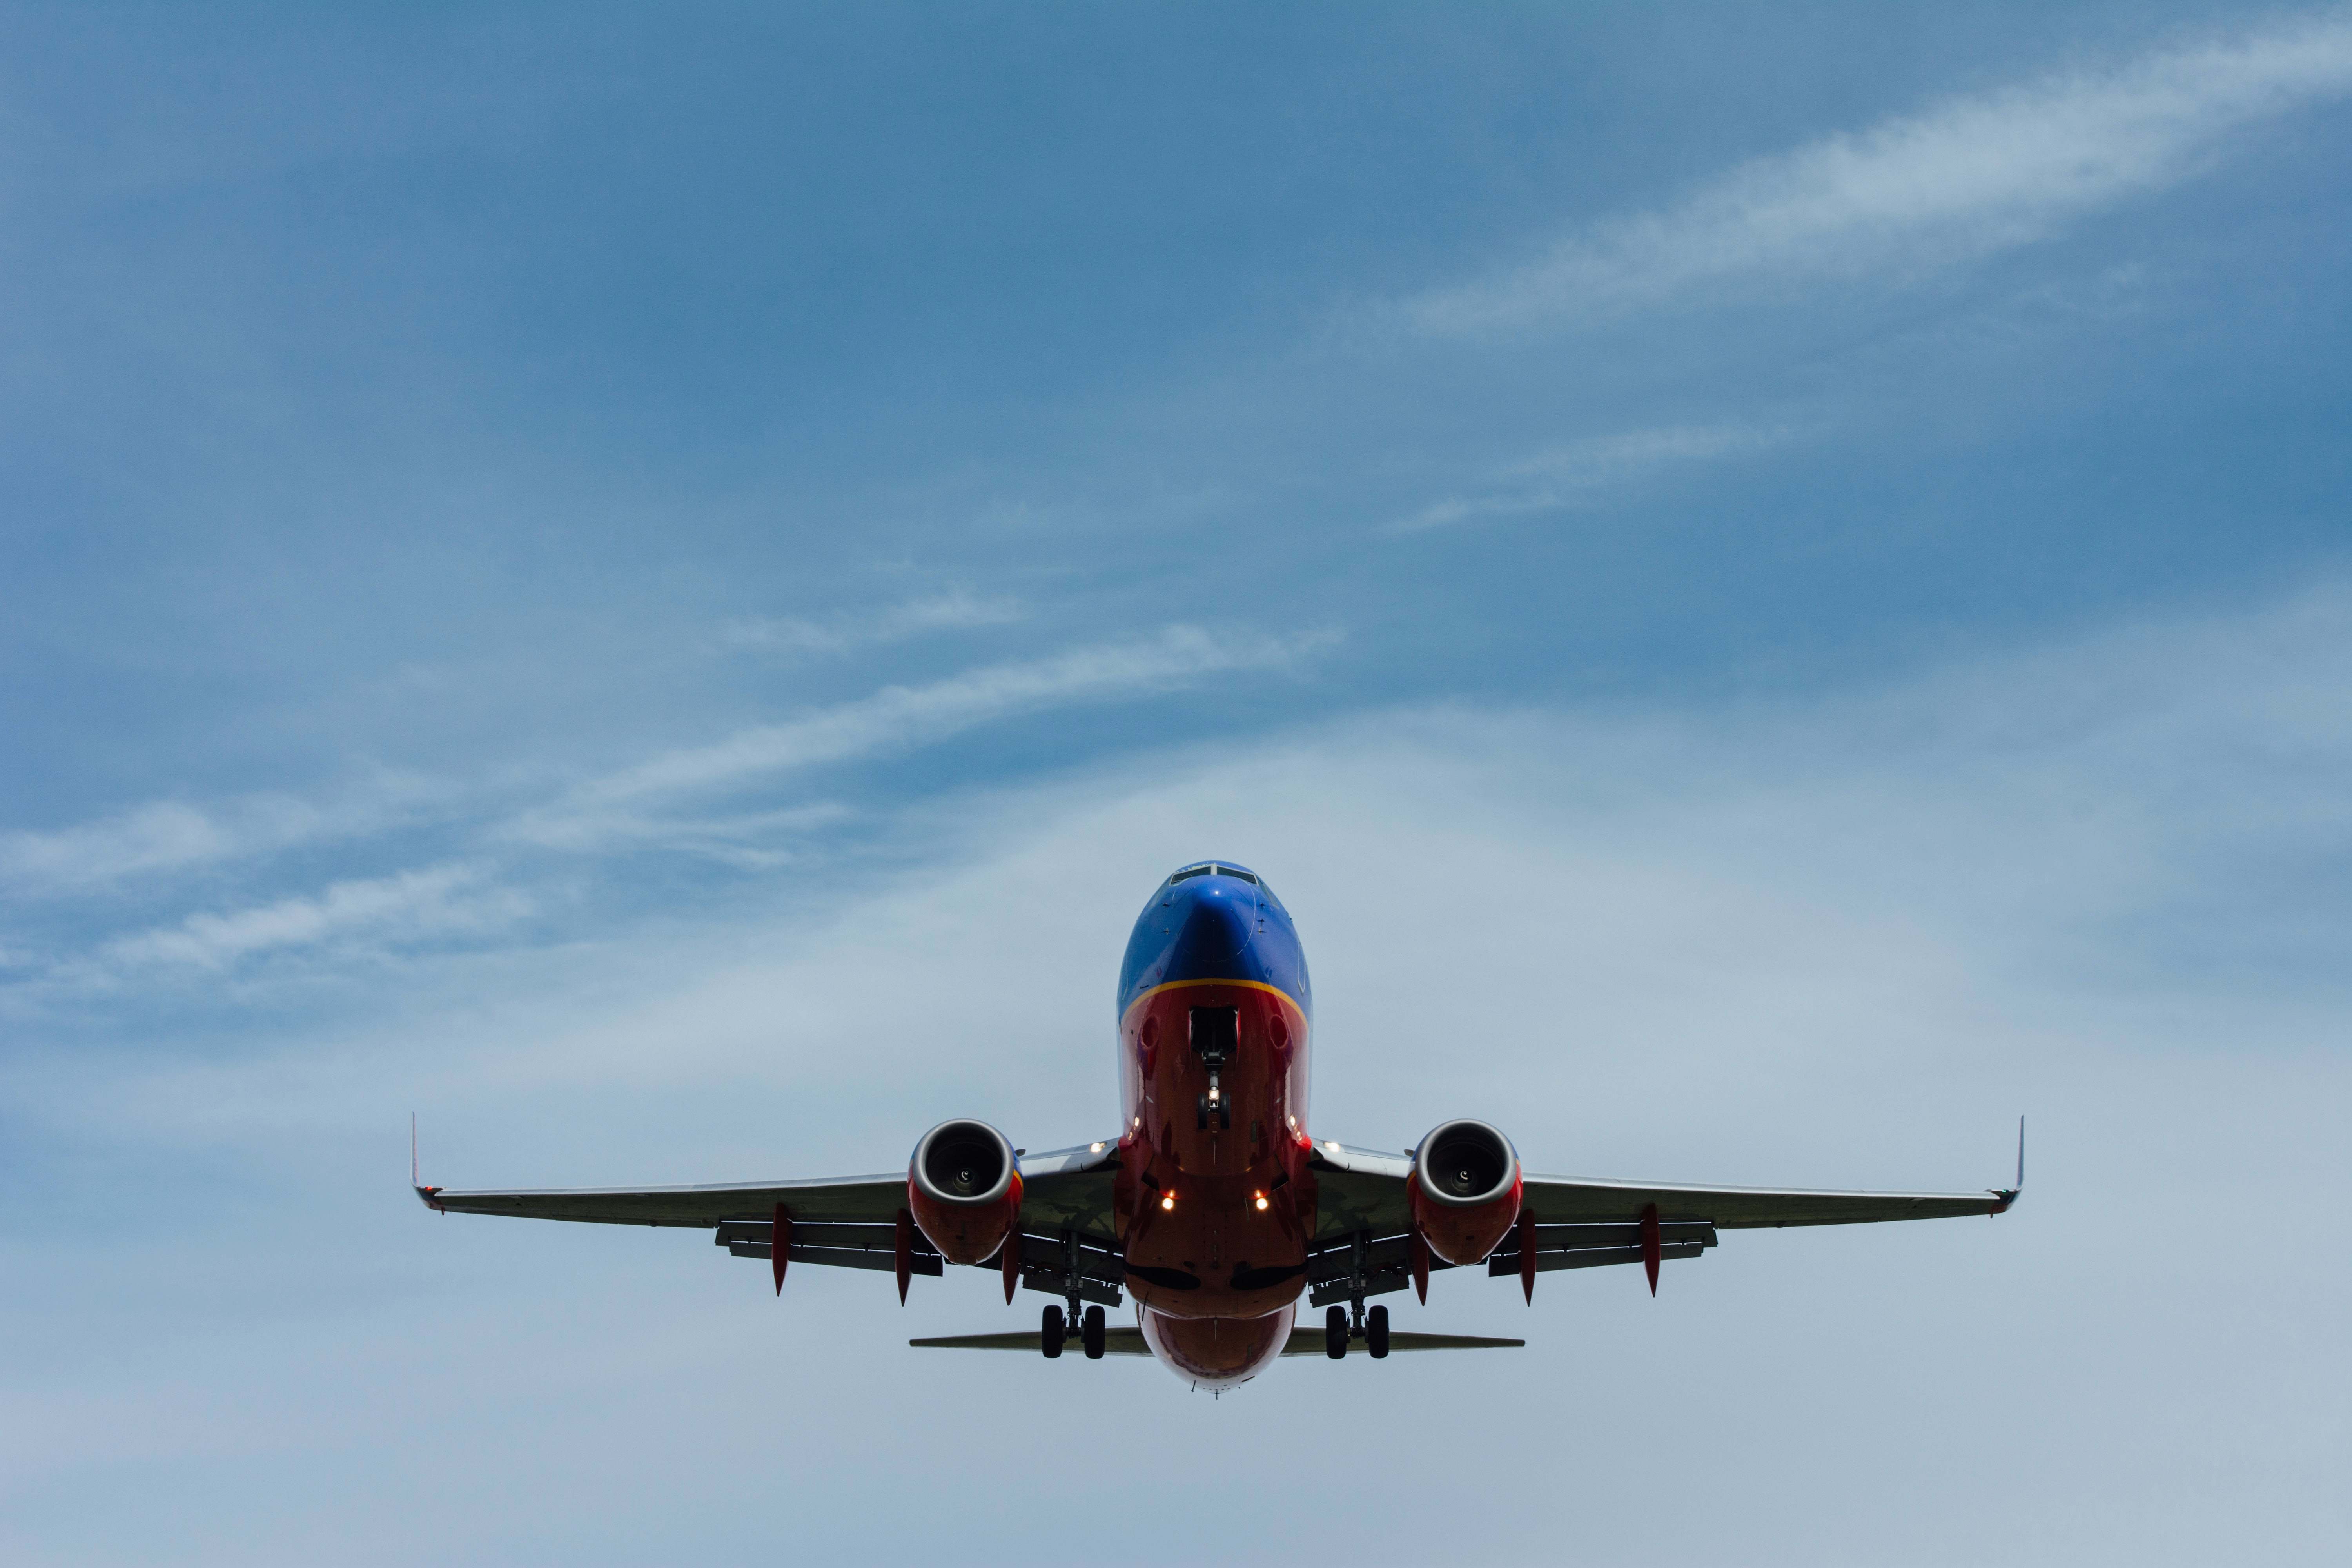 Transportation Blue And Red Airplane On Sky Aircraft Image Free Photo